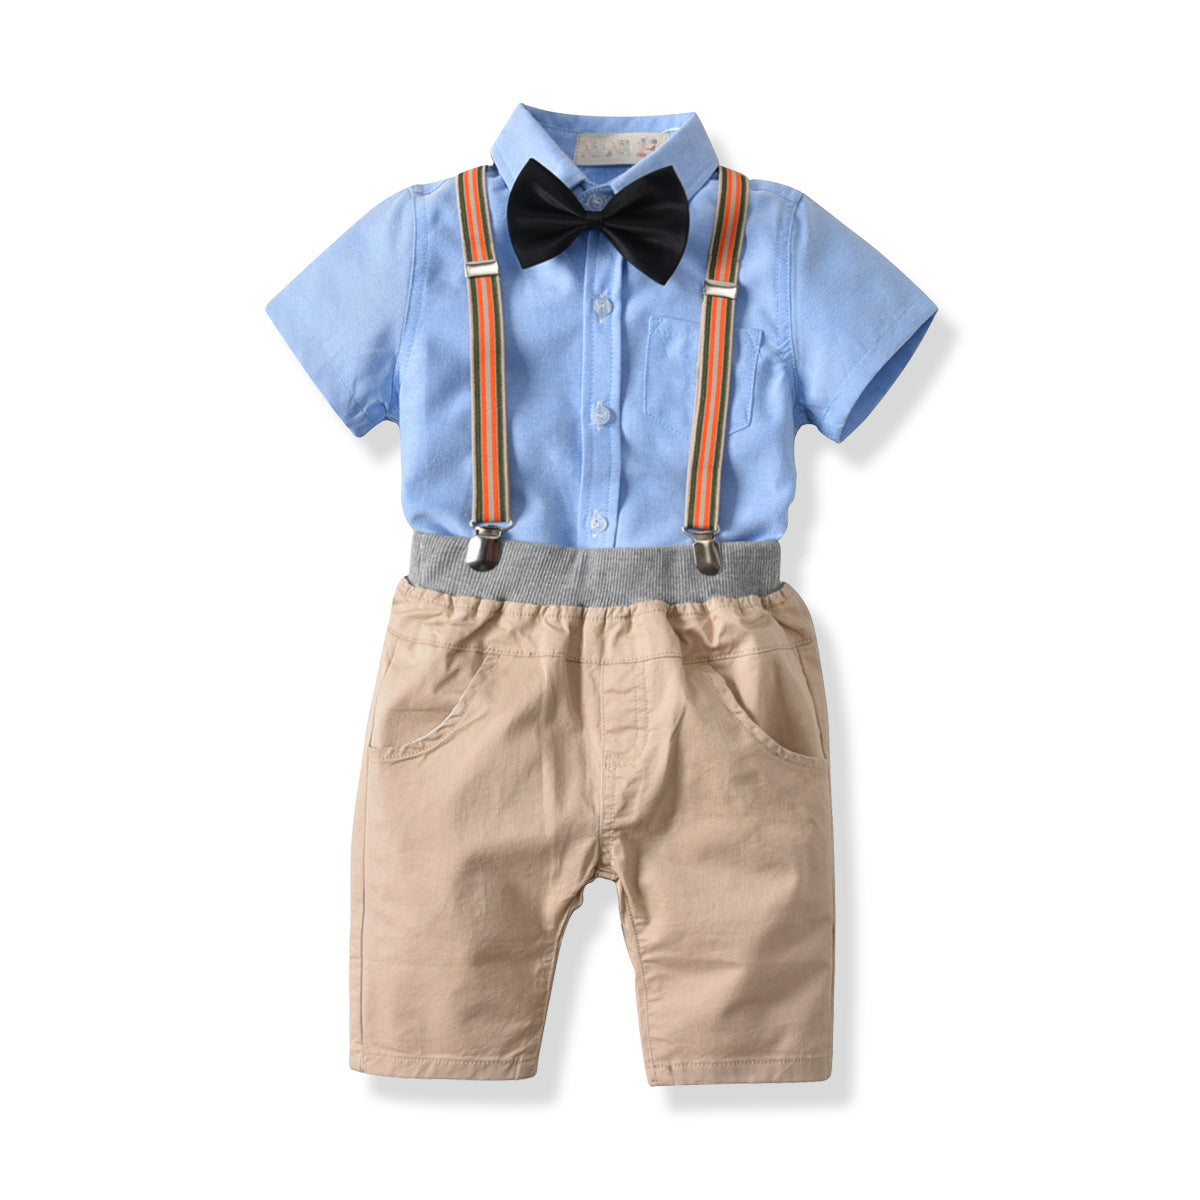 Kids Baby Boys Gentleman Formal Party Suits Short Sleeve Sets 2 Pcs